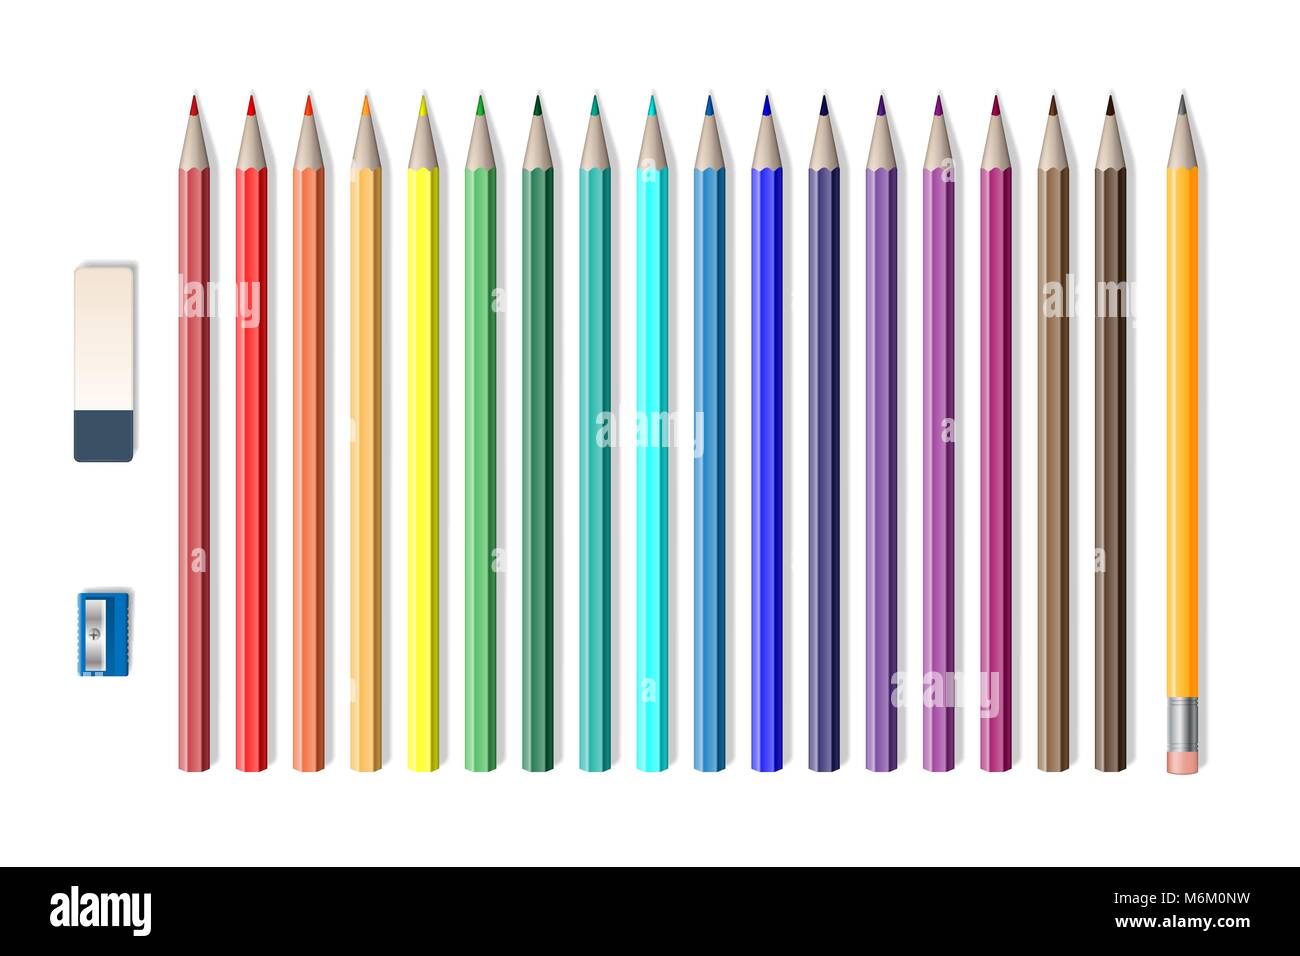 Set Of Colored Realistic Pencils With Sharpener And Eraser Isolated On